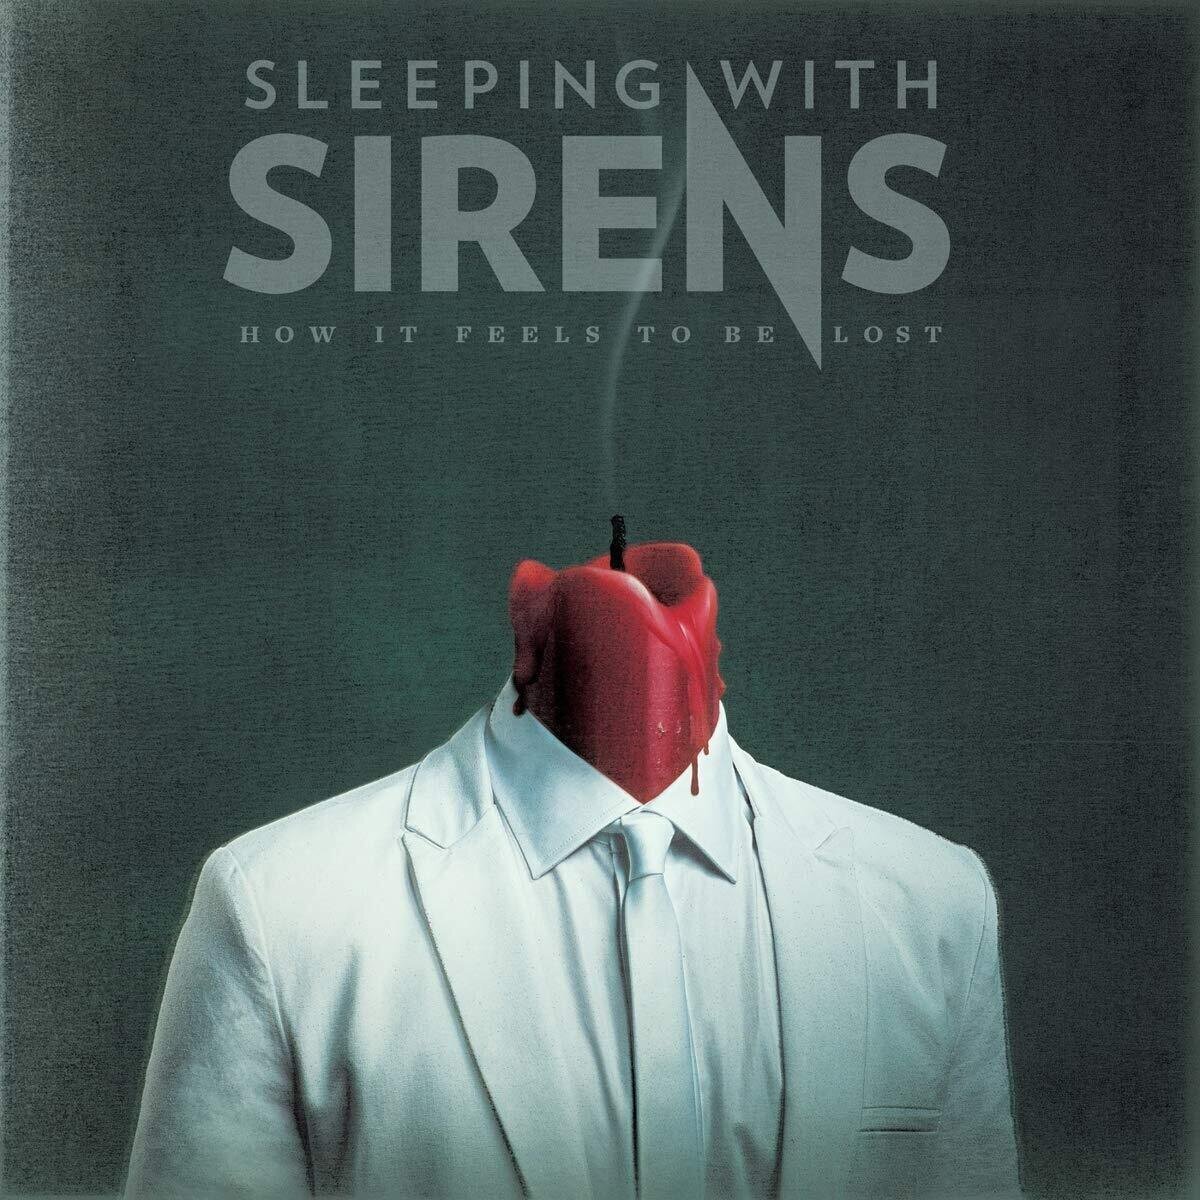 LP Sleeping With Sirens - How It Feels To Be Lost (White/Pink Splatter) (LP)